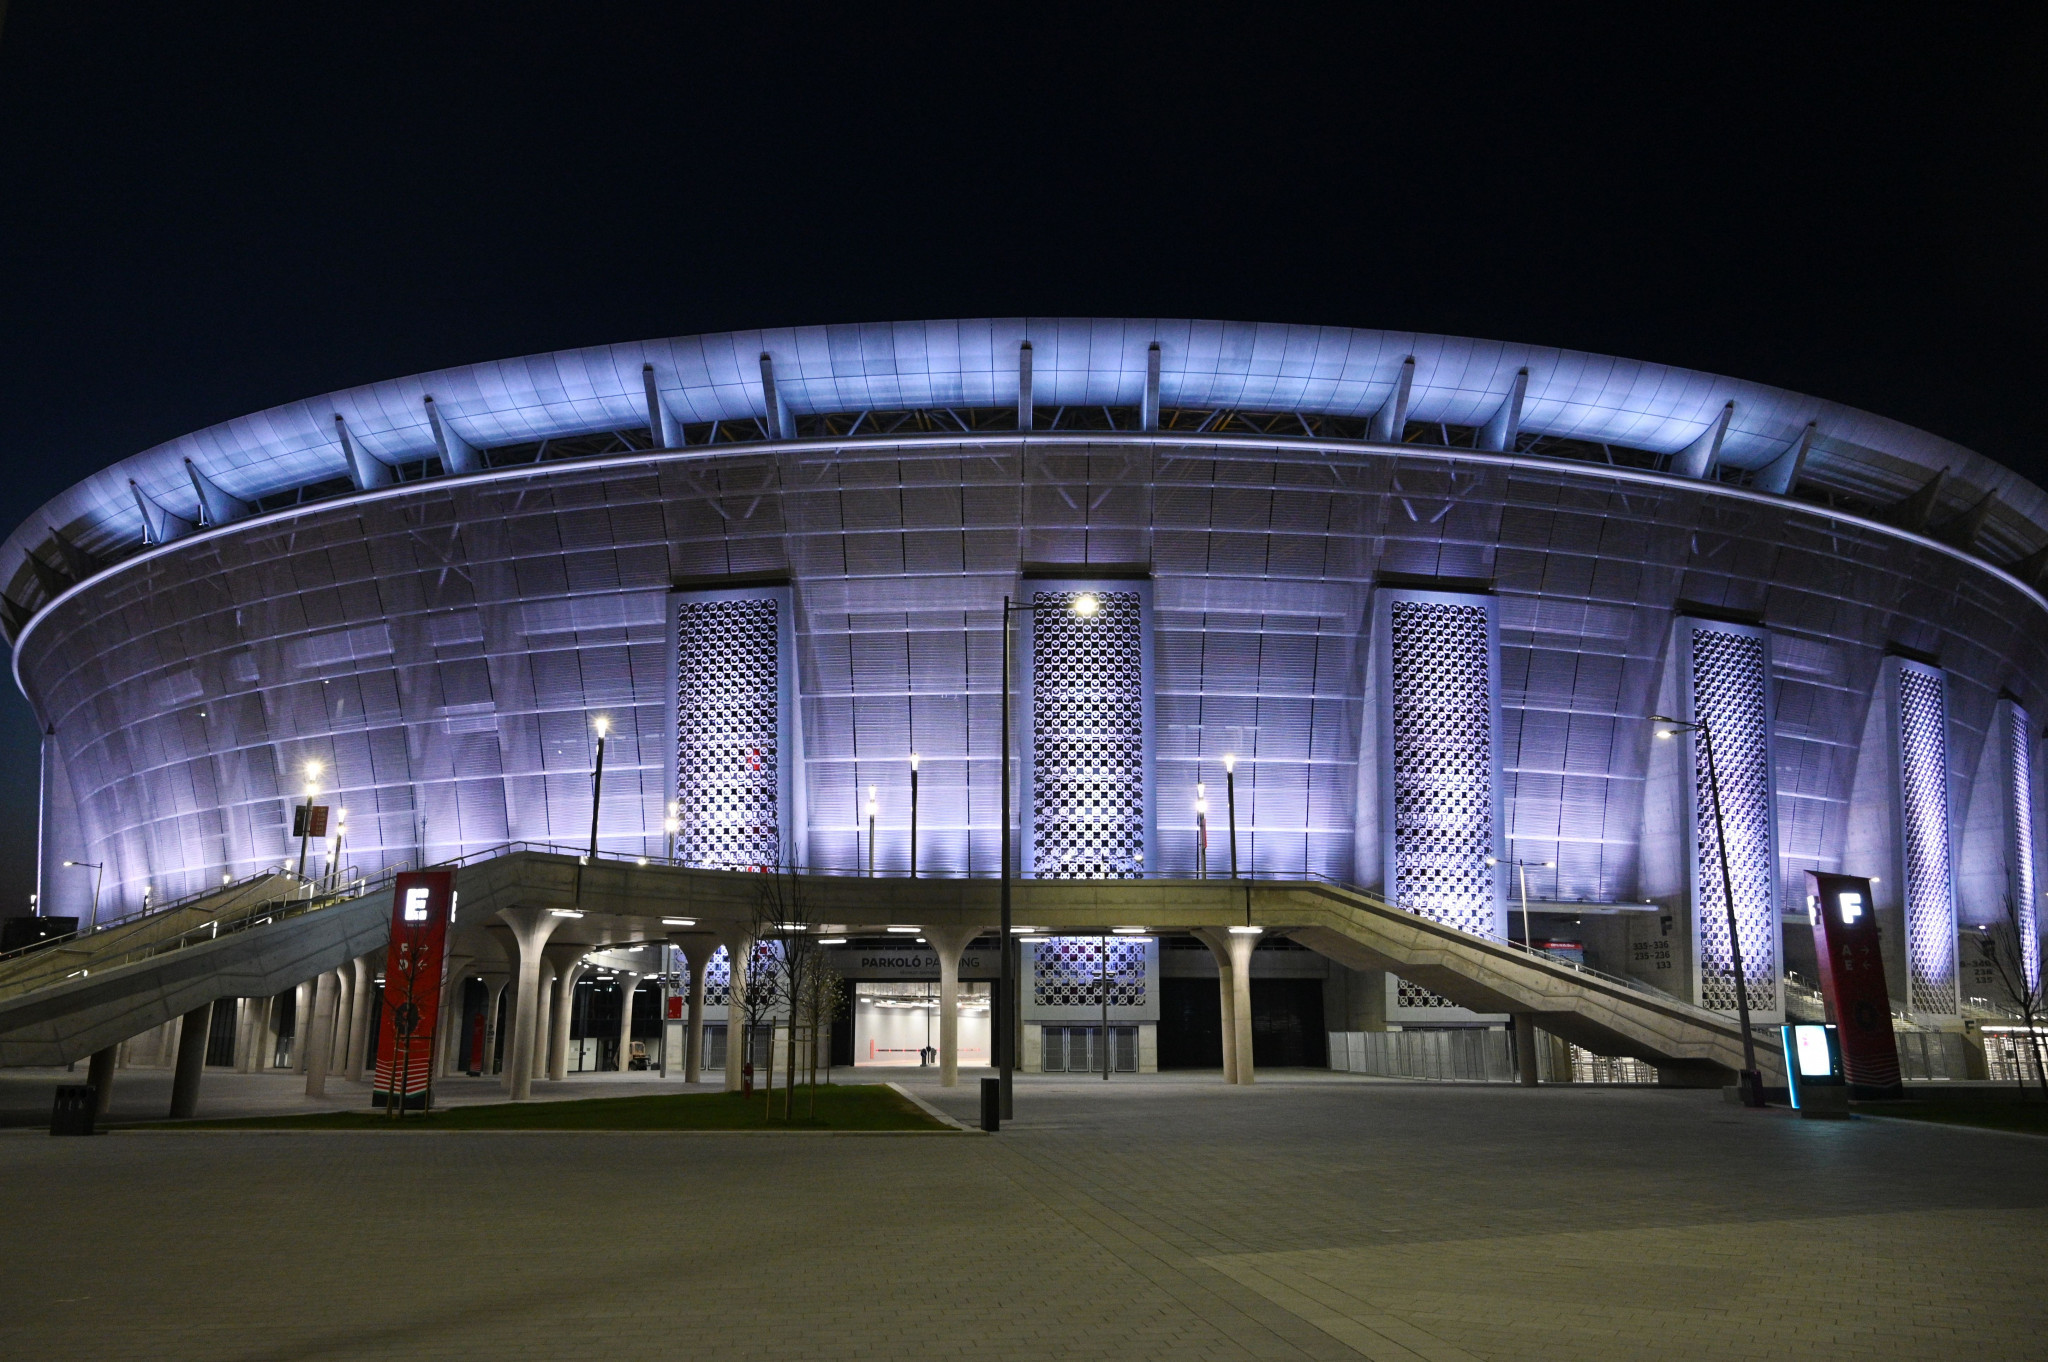 The Puskás Aréna is set to play host to the 2020 UEFA Super Cup ©Getty Images